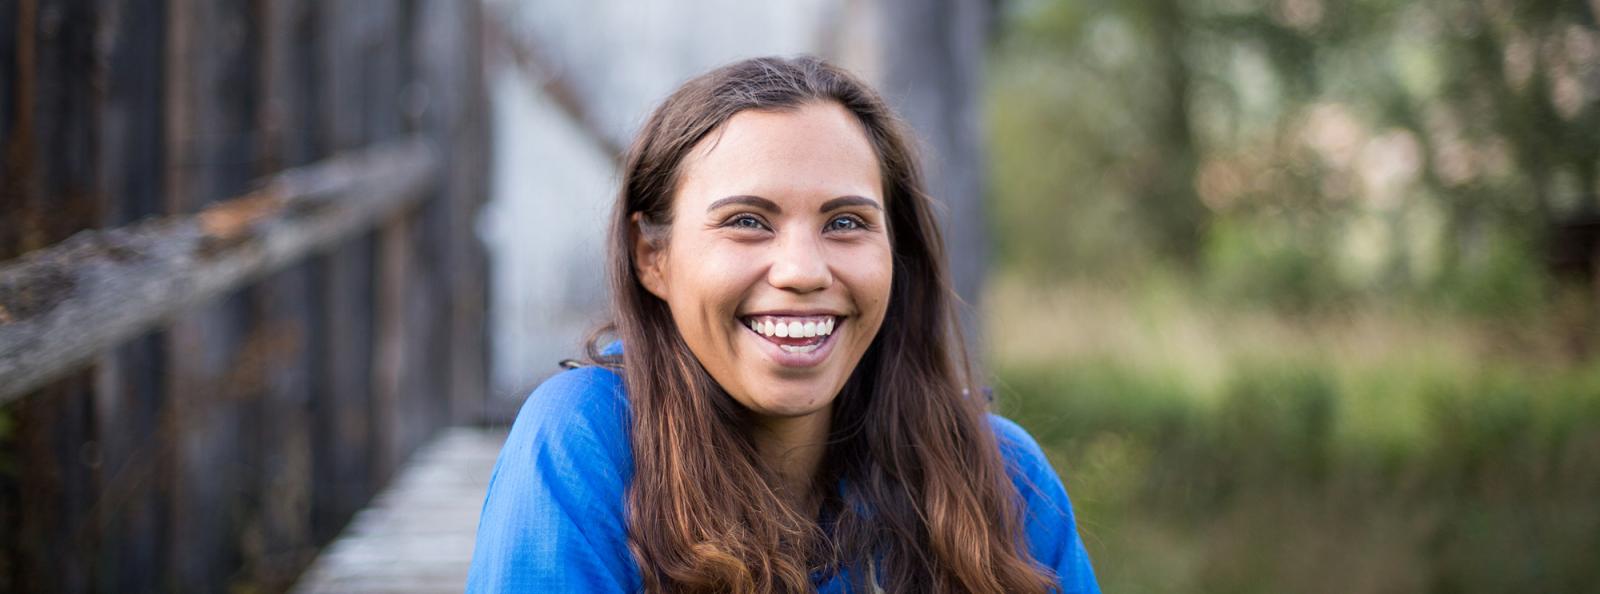 Indigenous high school student smiling happily for photo